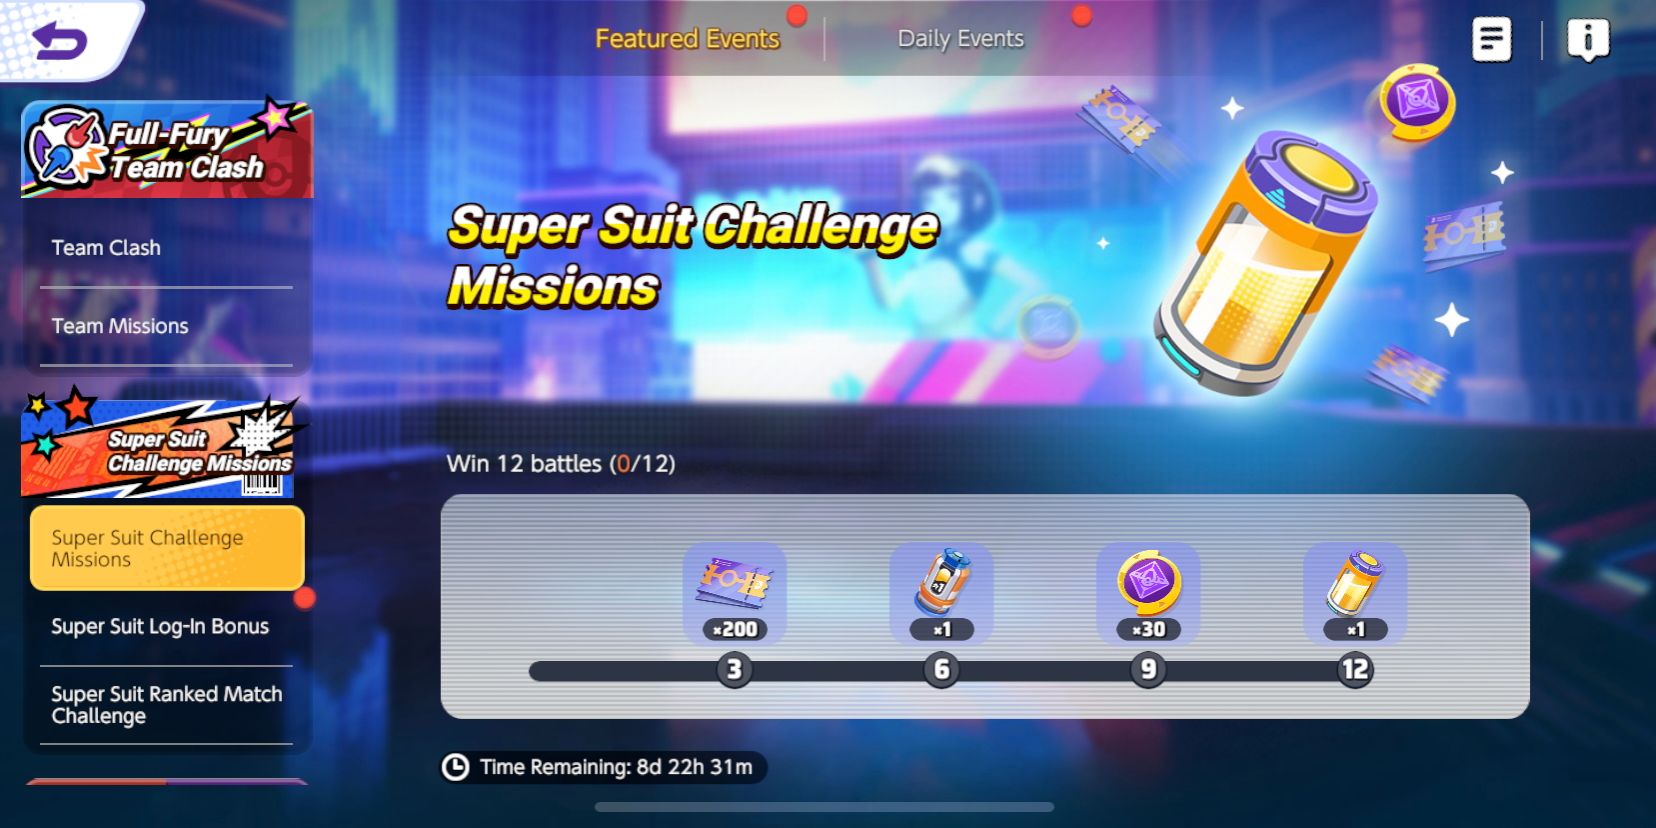 The Super Suit Challenge Missions screen showing the four different event rewards